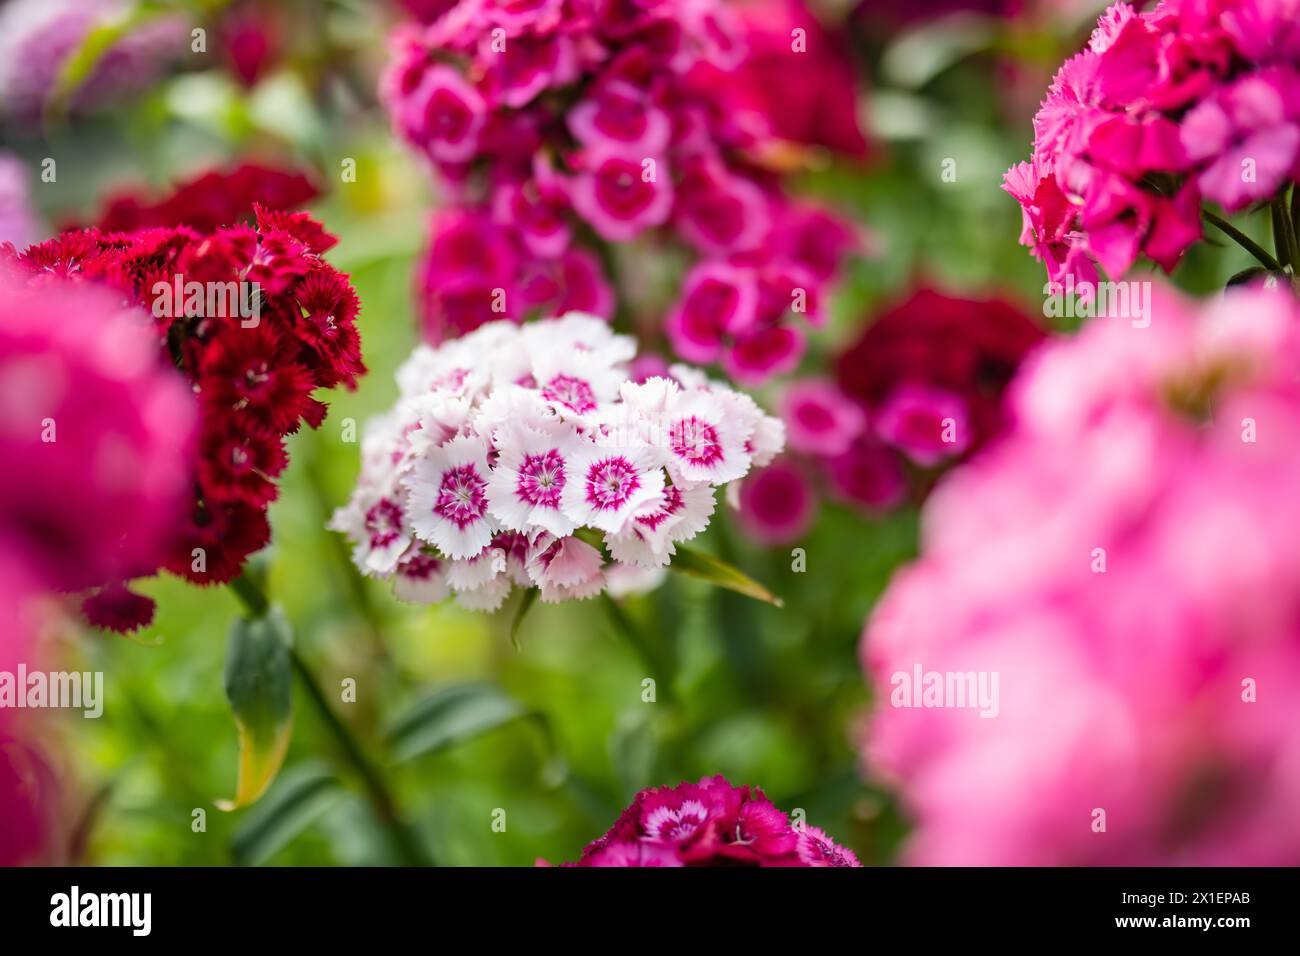 Assorted colorful flowers of Dianthus barbatus or the sweet William plant blossoming in a garden in a sunny summer day. Beauty in nature. Stock Photo